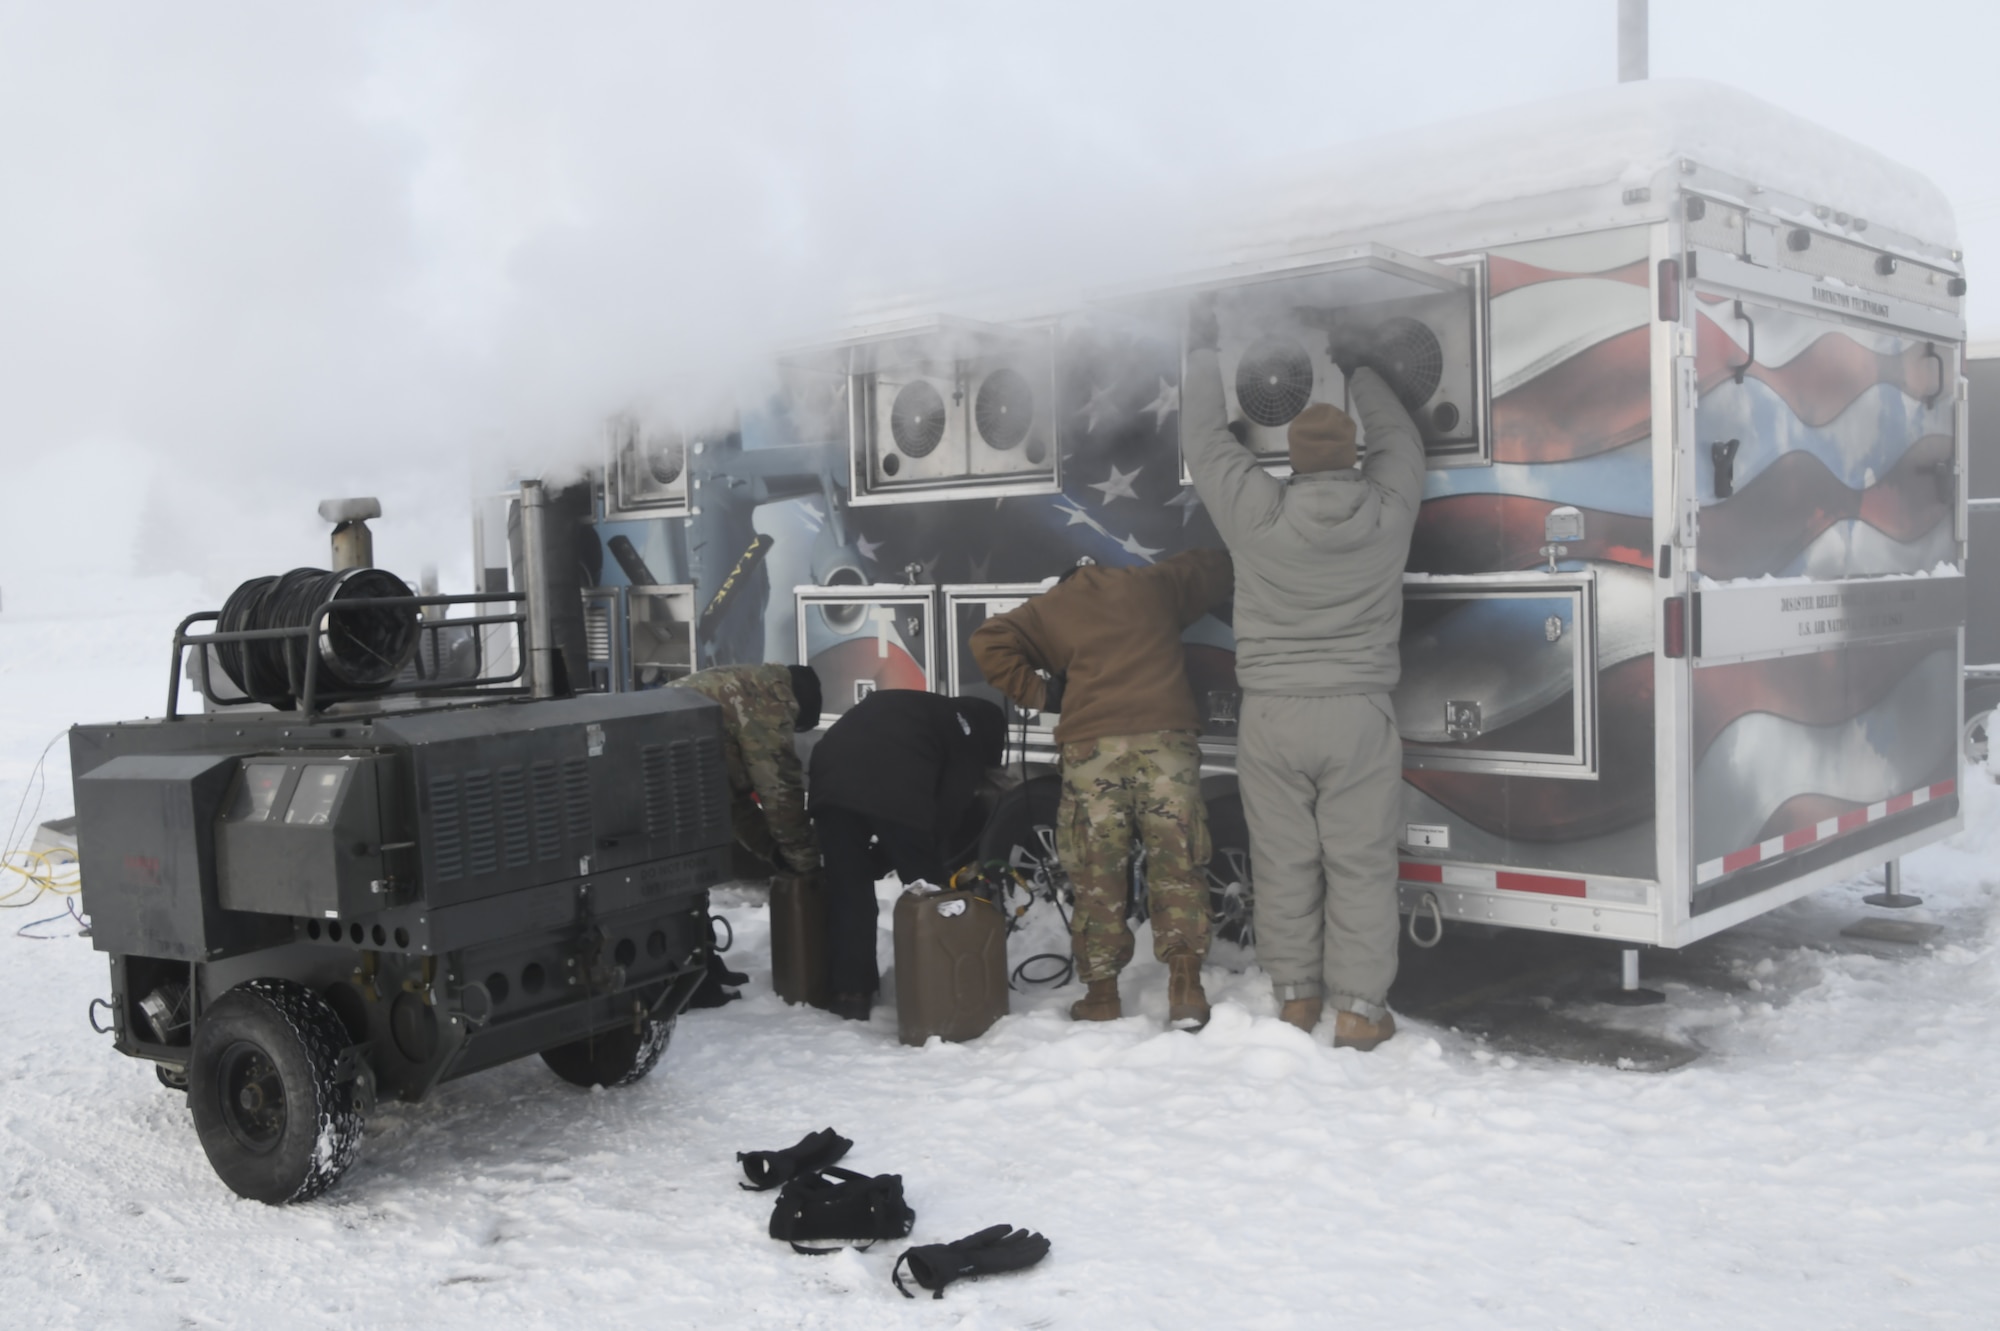 The 168th Services Airmen prepare and test the Disaster Relief Mobile Kitchen trailer in -40 degree temperatures.